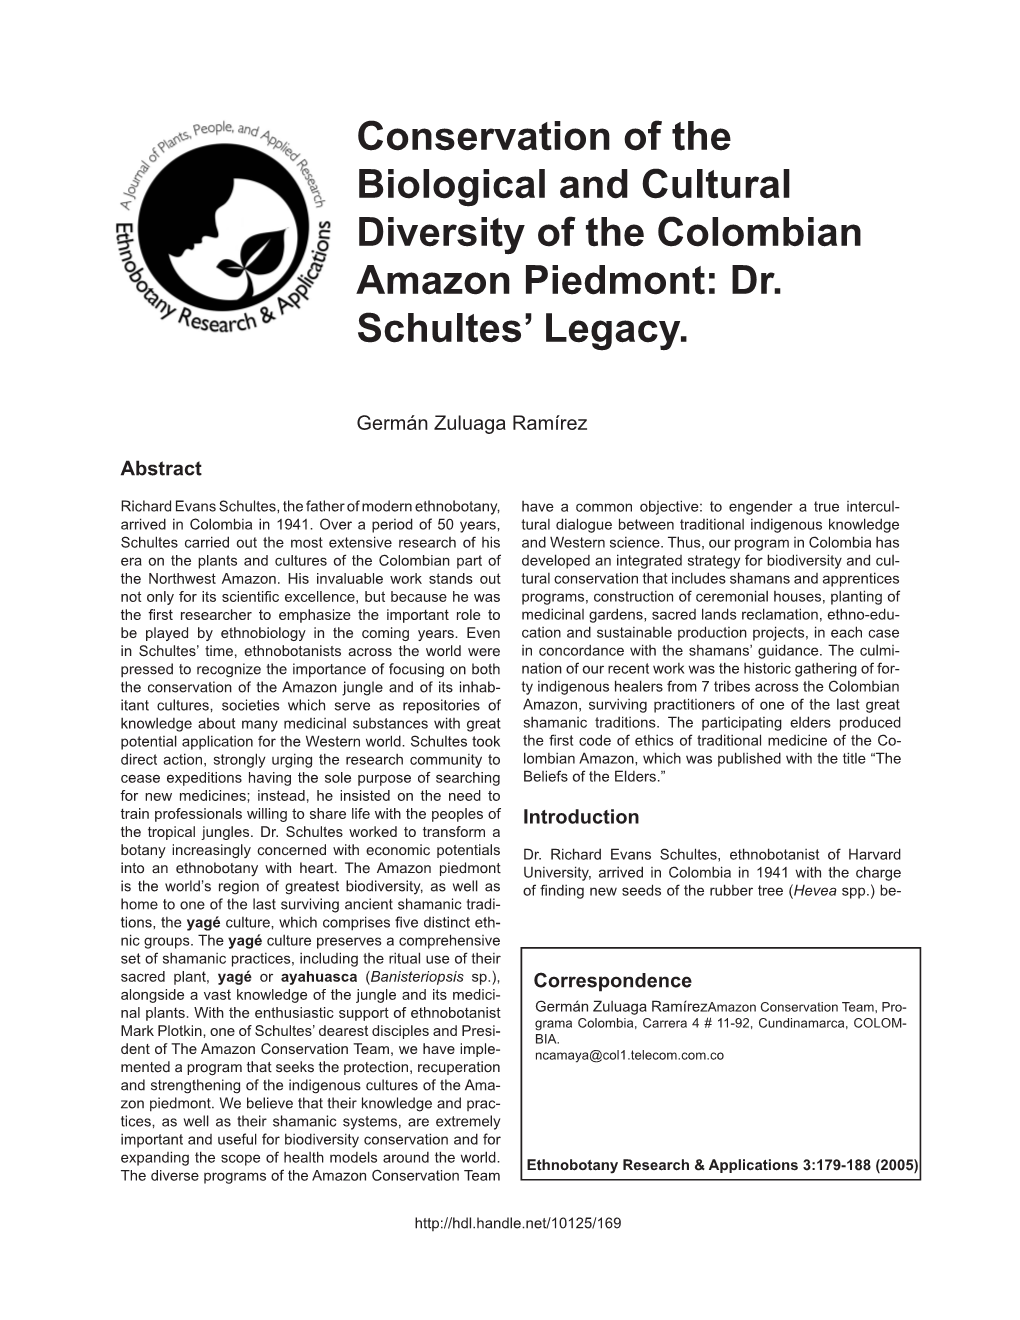 Conservation of the Biological and Cultural Diversity of the Colombian Amazon Piedmont: Dr